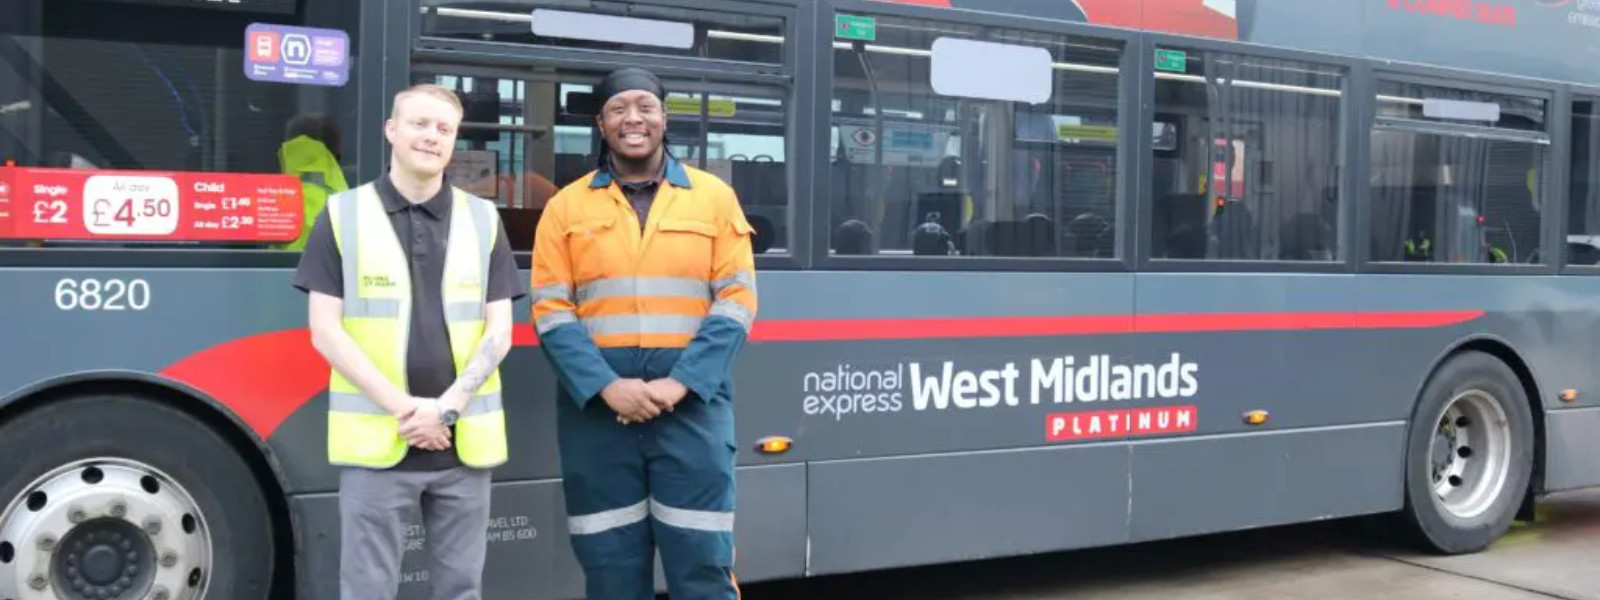 Trumaine’s perseverance secured him an apprenticeship with National Express